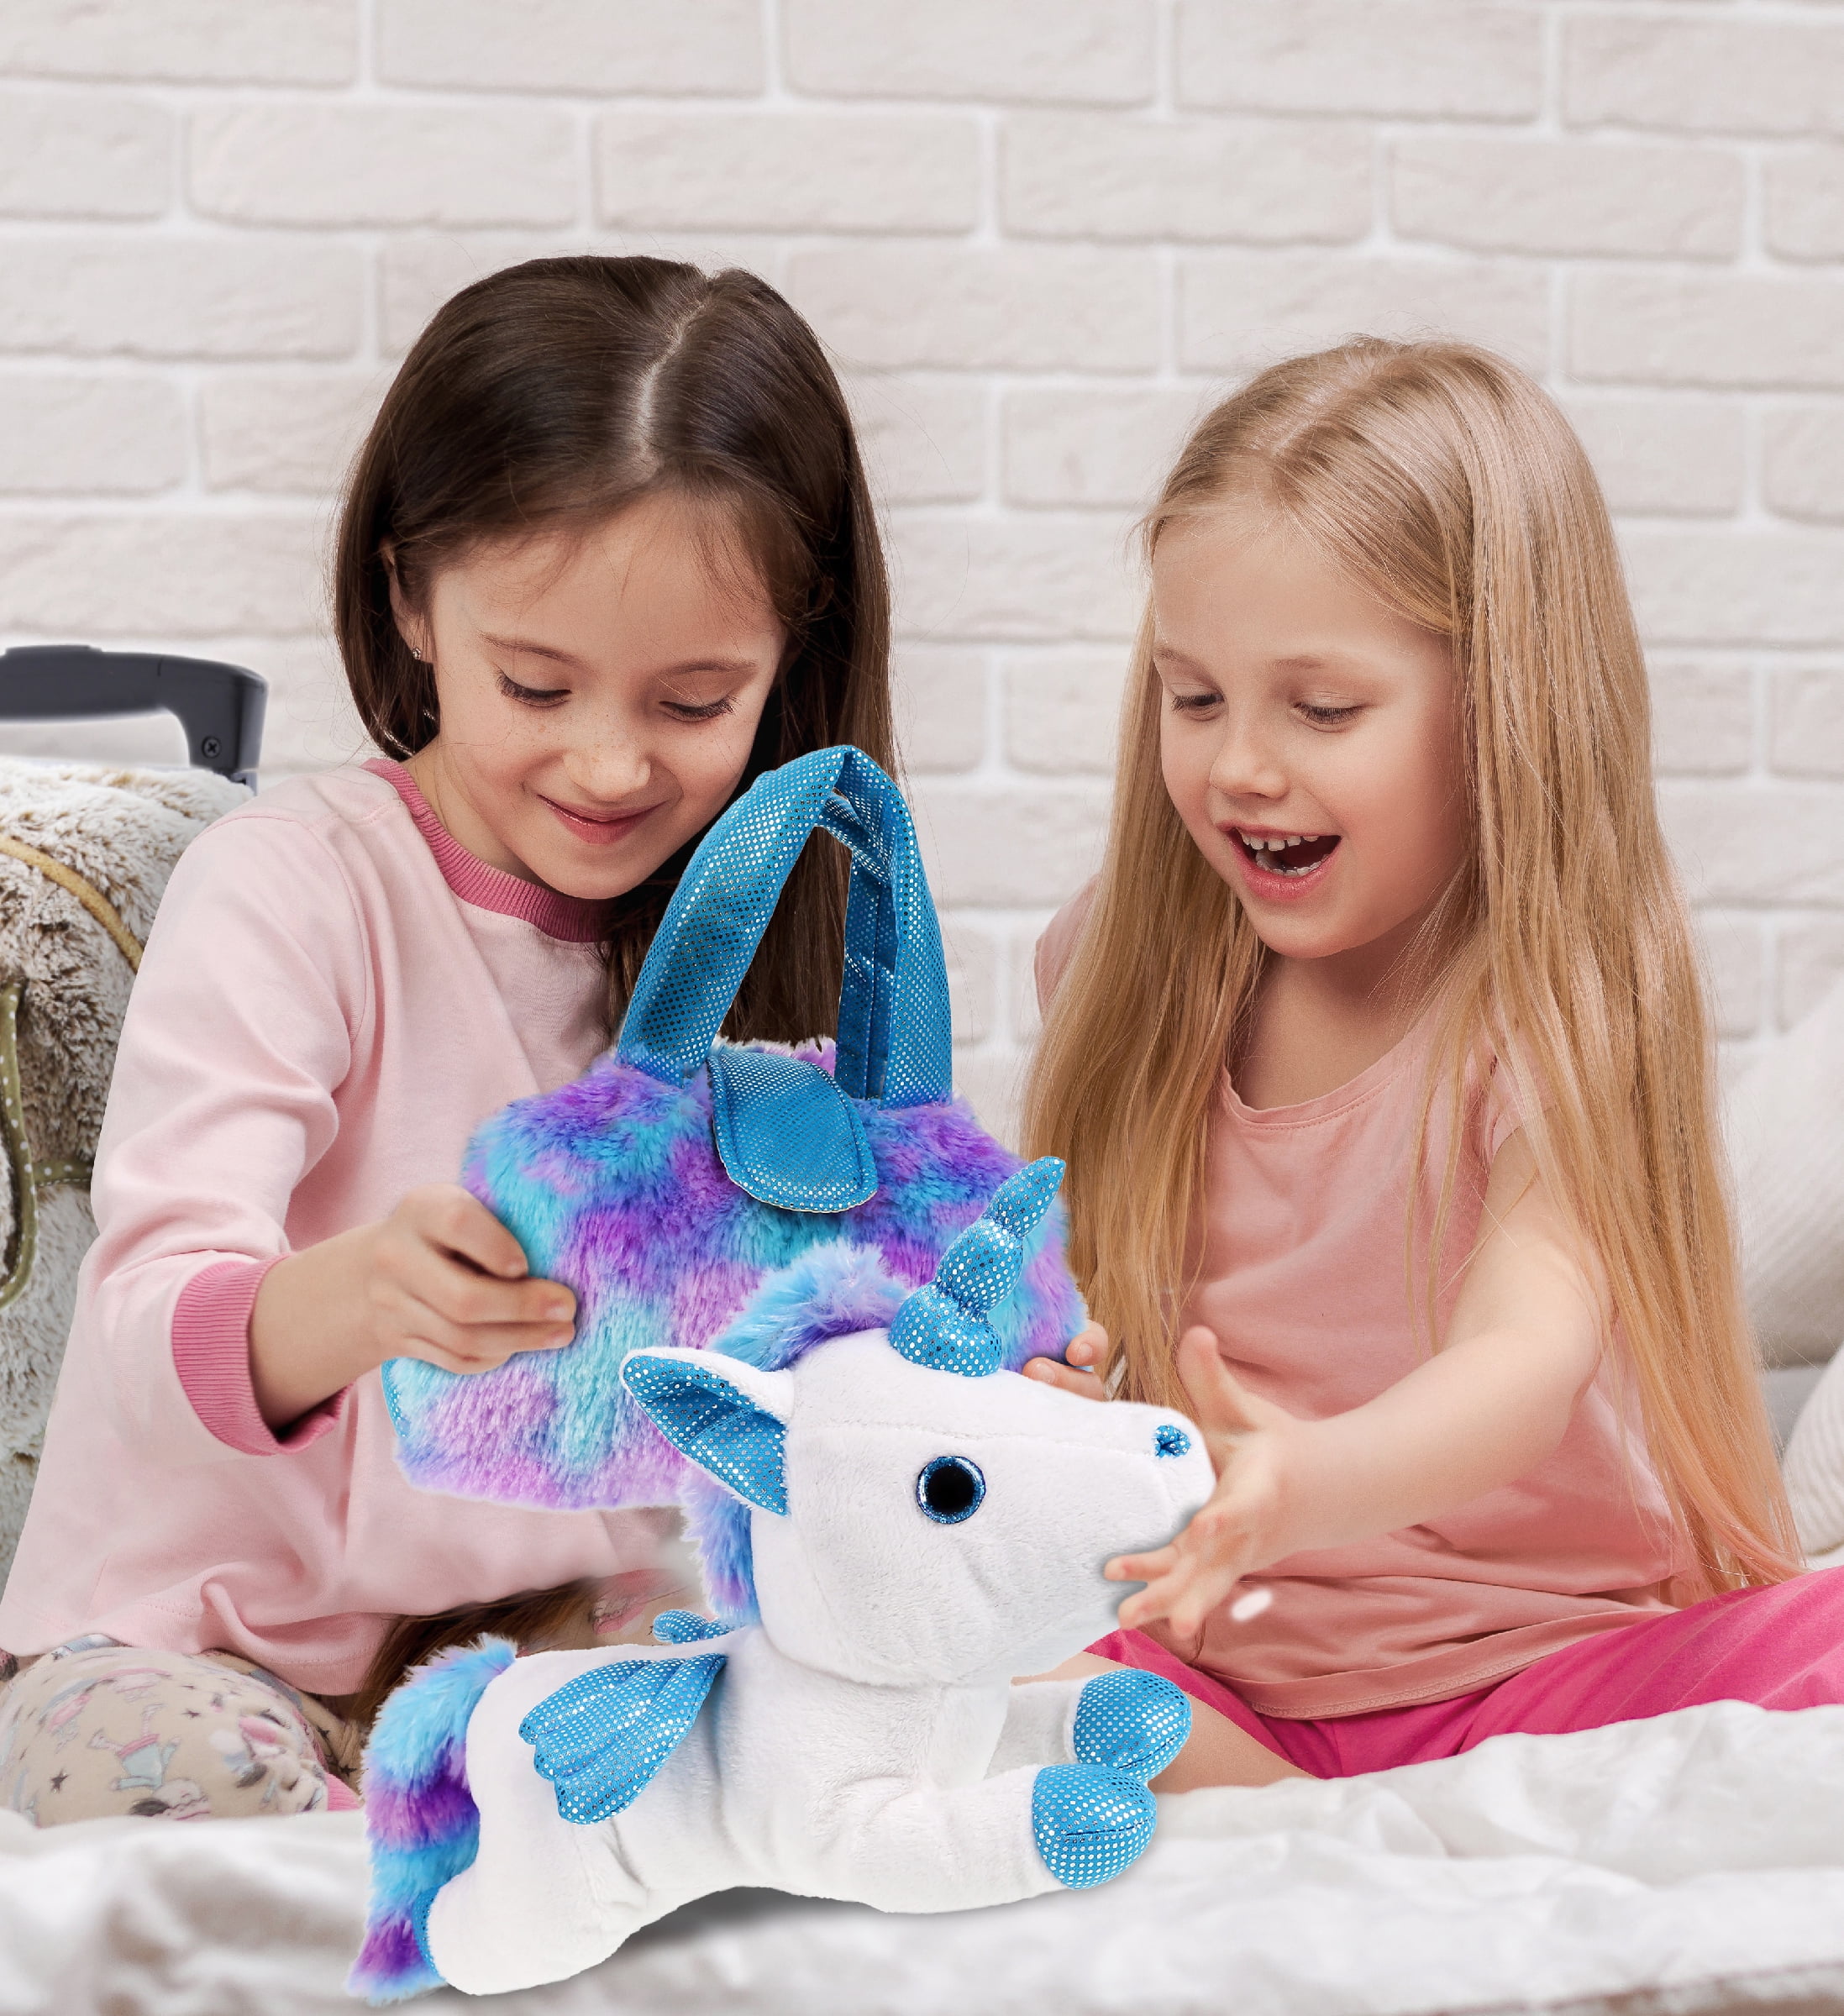 Cute 23cm Unicorn Unicorn Teddy Backpack For Kids Mini Pink Schoolbag With  Cartoon Design From Smyy5, $4.93 | DHgate.Com